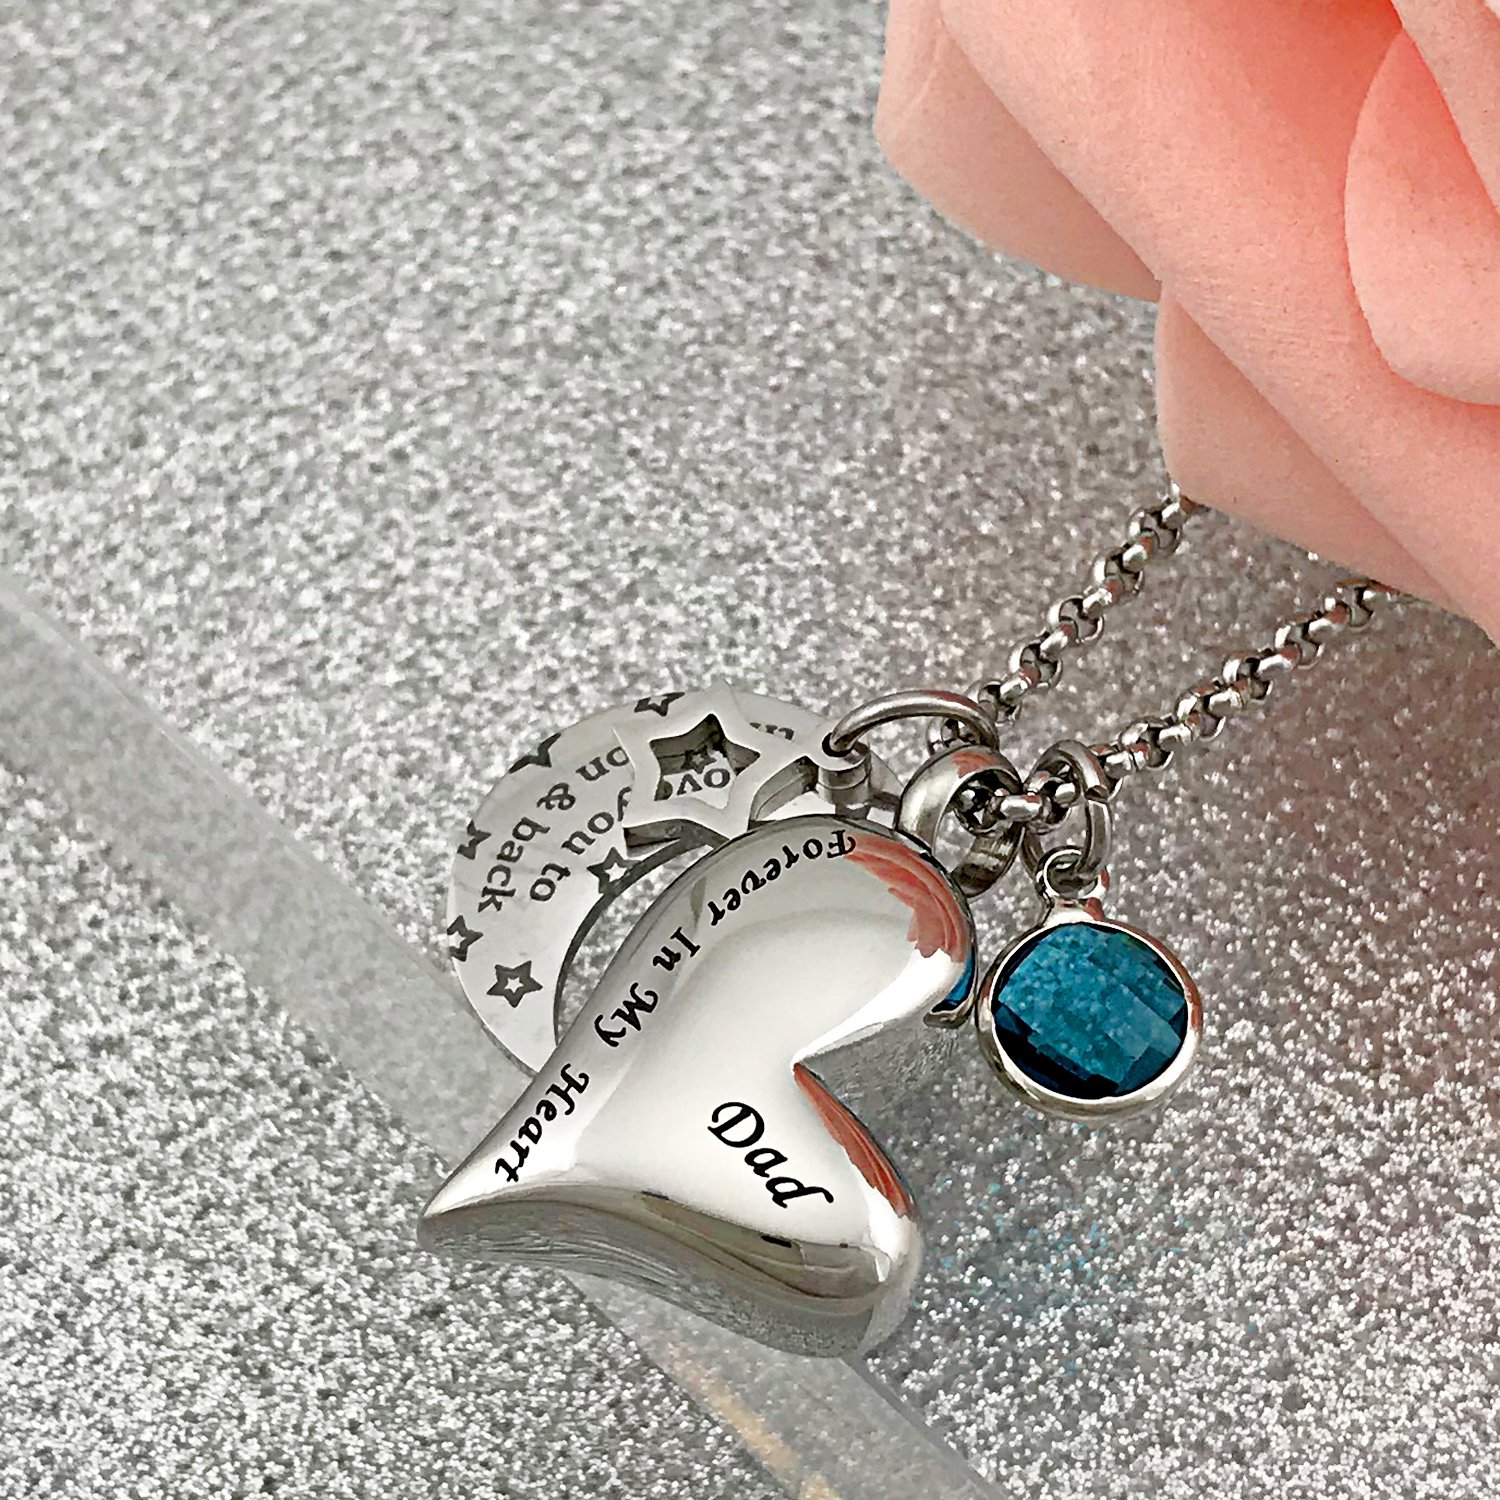 YOUFENG Urn Necklaces for Ashes I Love You to The Moon and Back for Dad Cremation Urn Locket Birthstone Jewelry